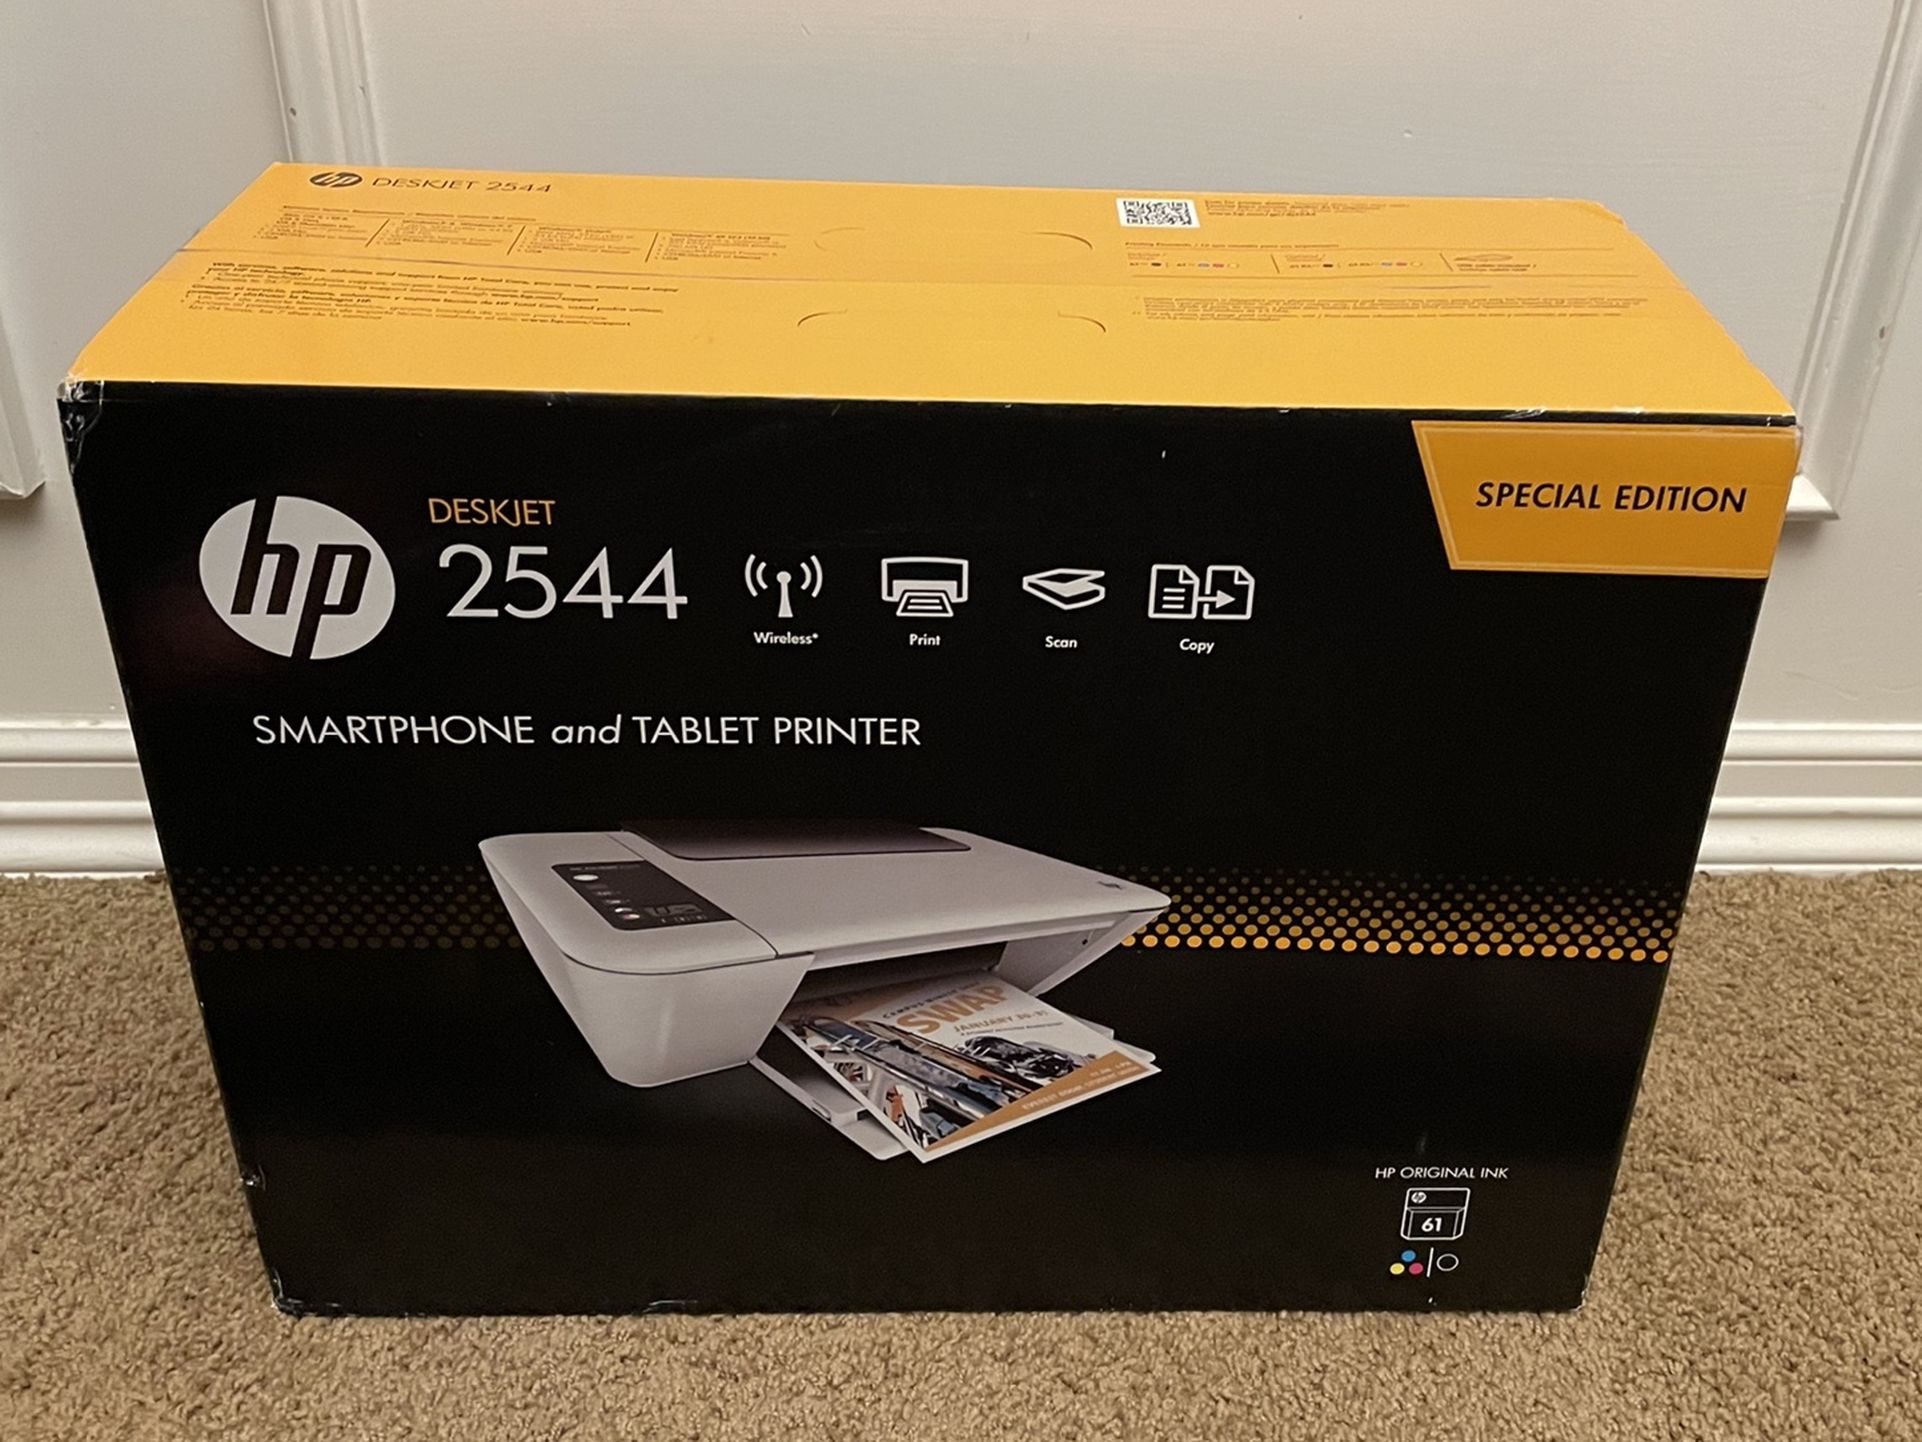 HP DeskJet 2544 Compact All-in-One Wireless Printer with Mobile Printing